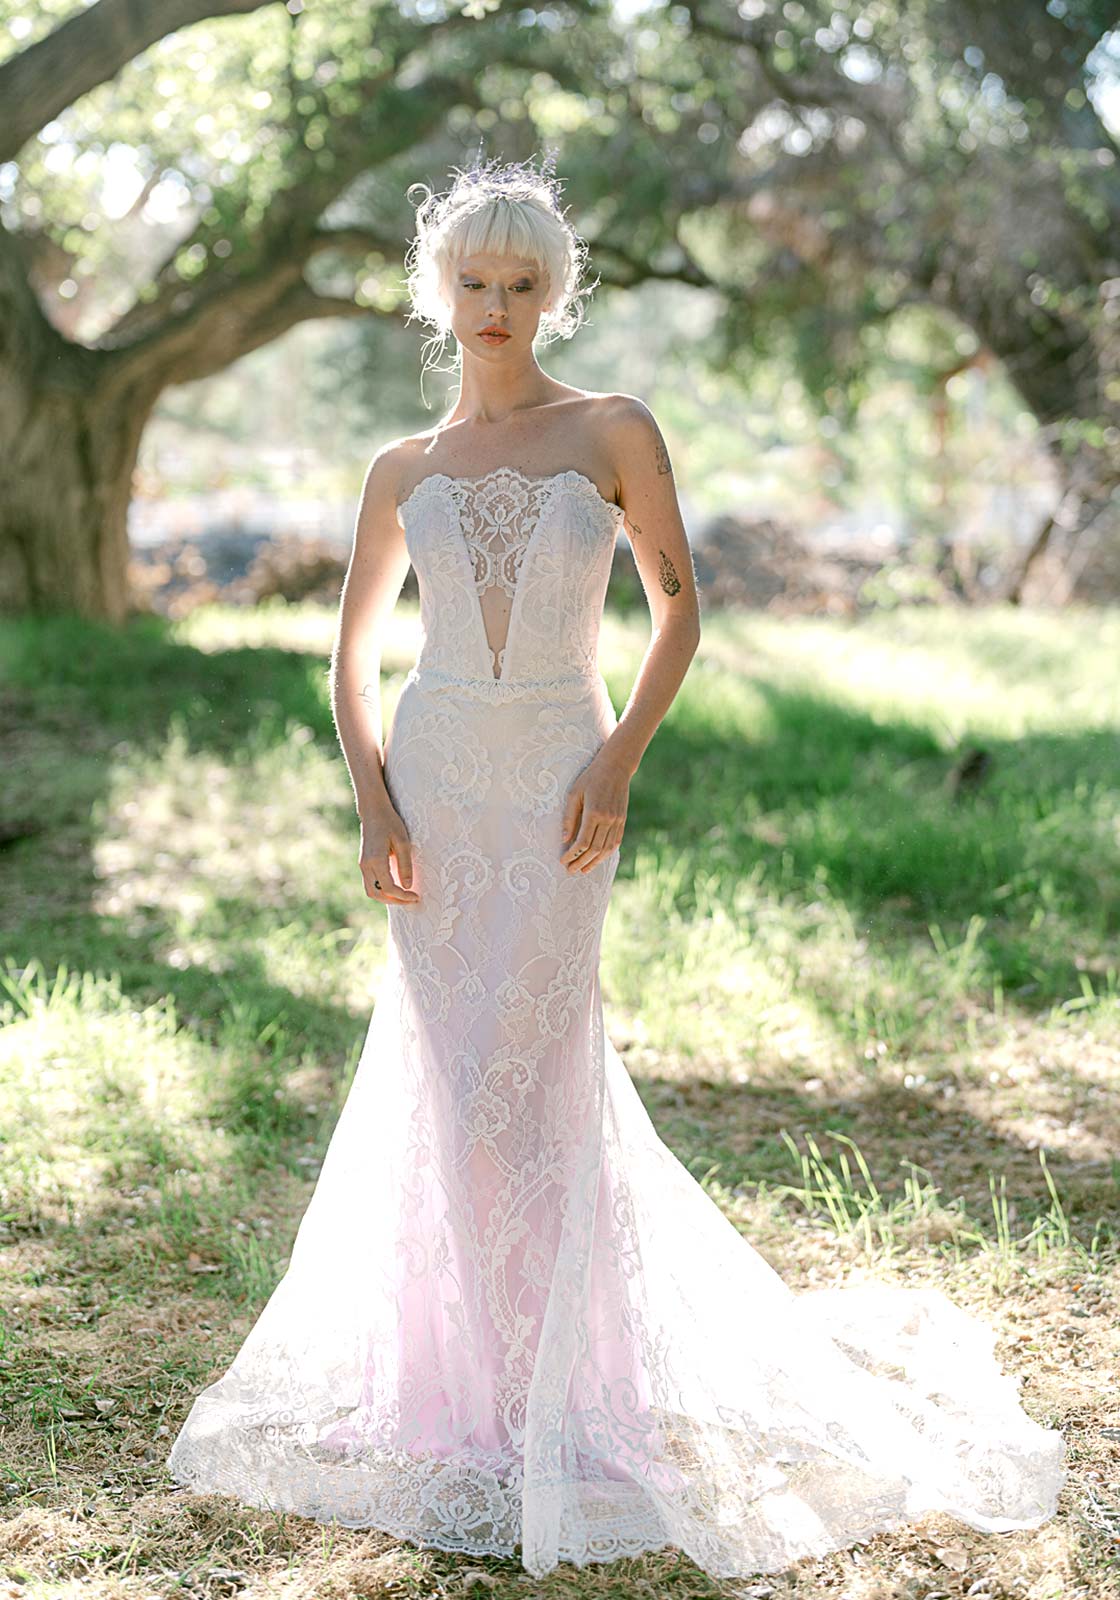 Quill Lace Wedding Dress